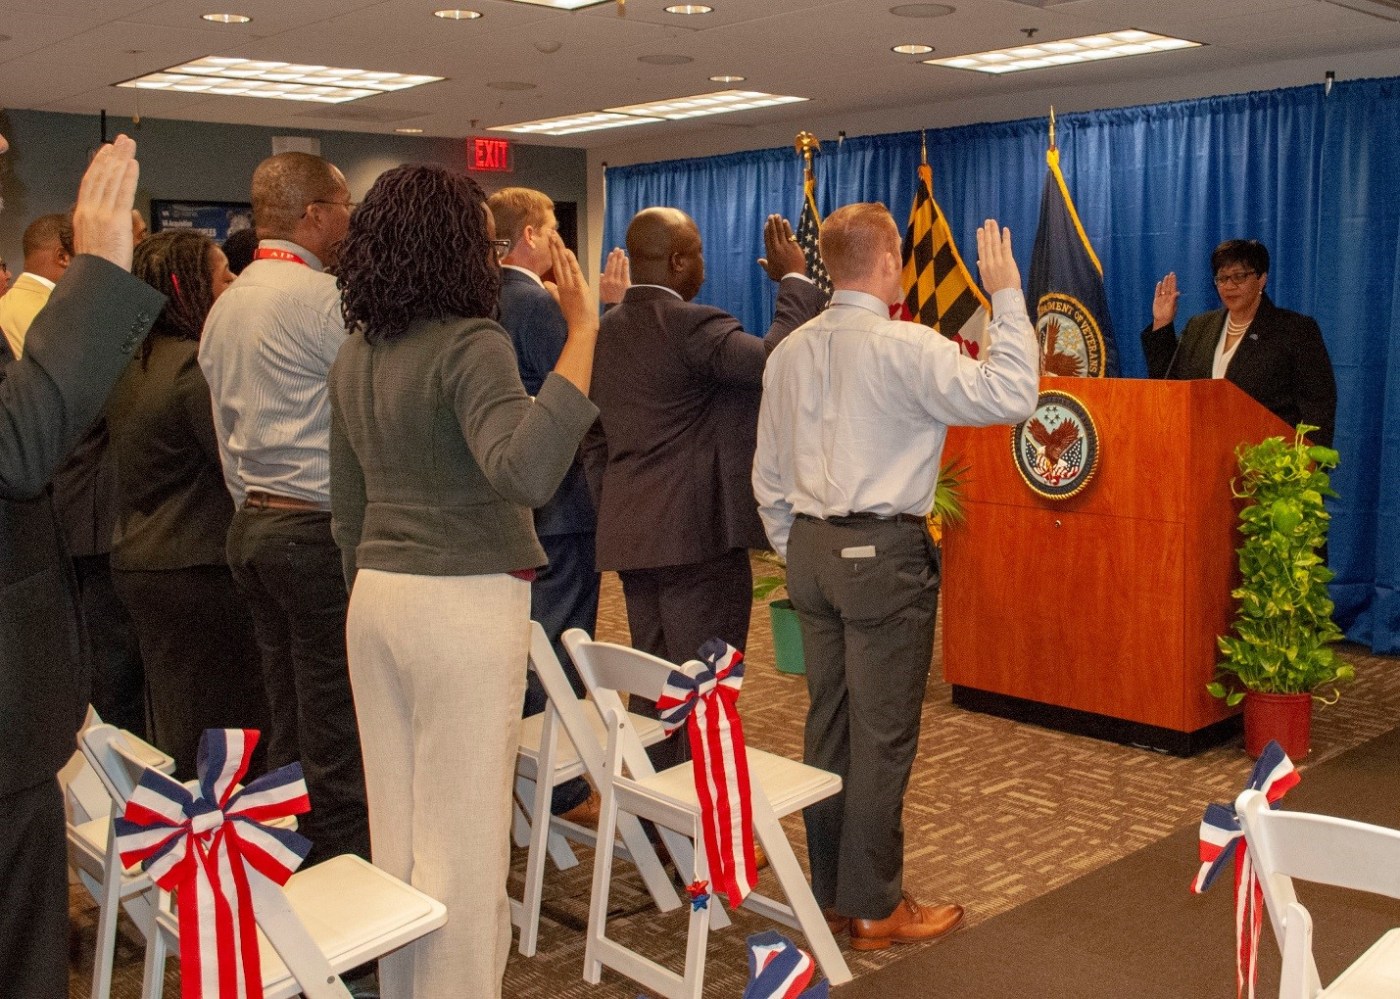 VA Acquisition Academy Expands the Warriors to Workforce Program